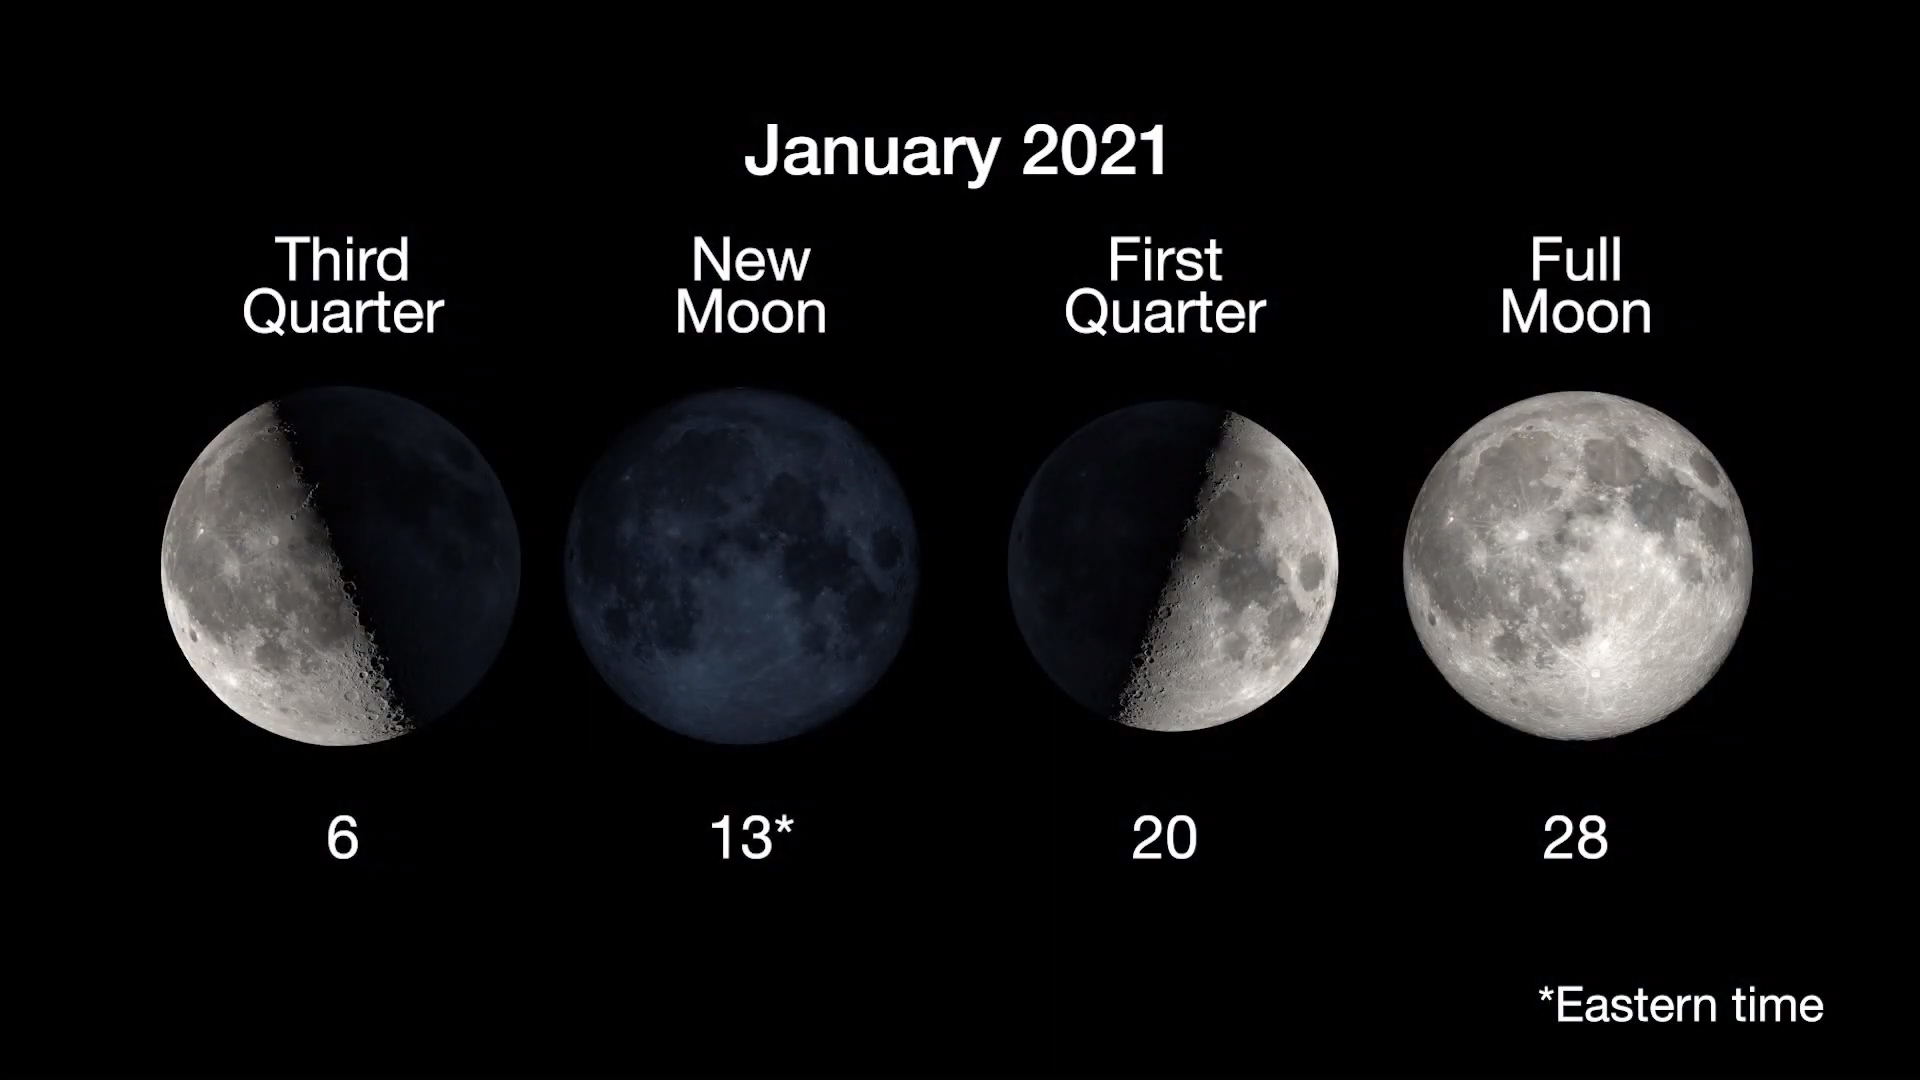 MoonPhases_Jan2021